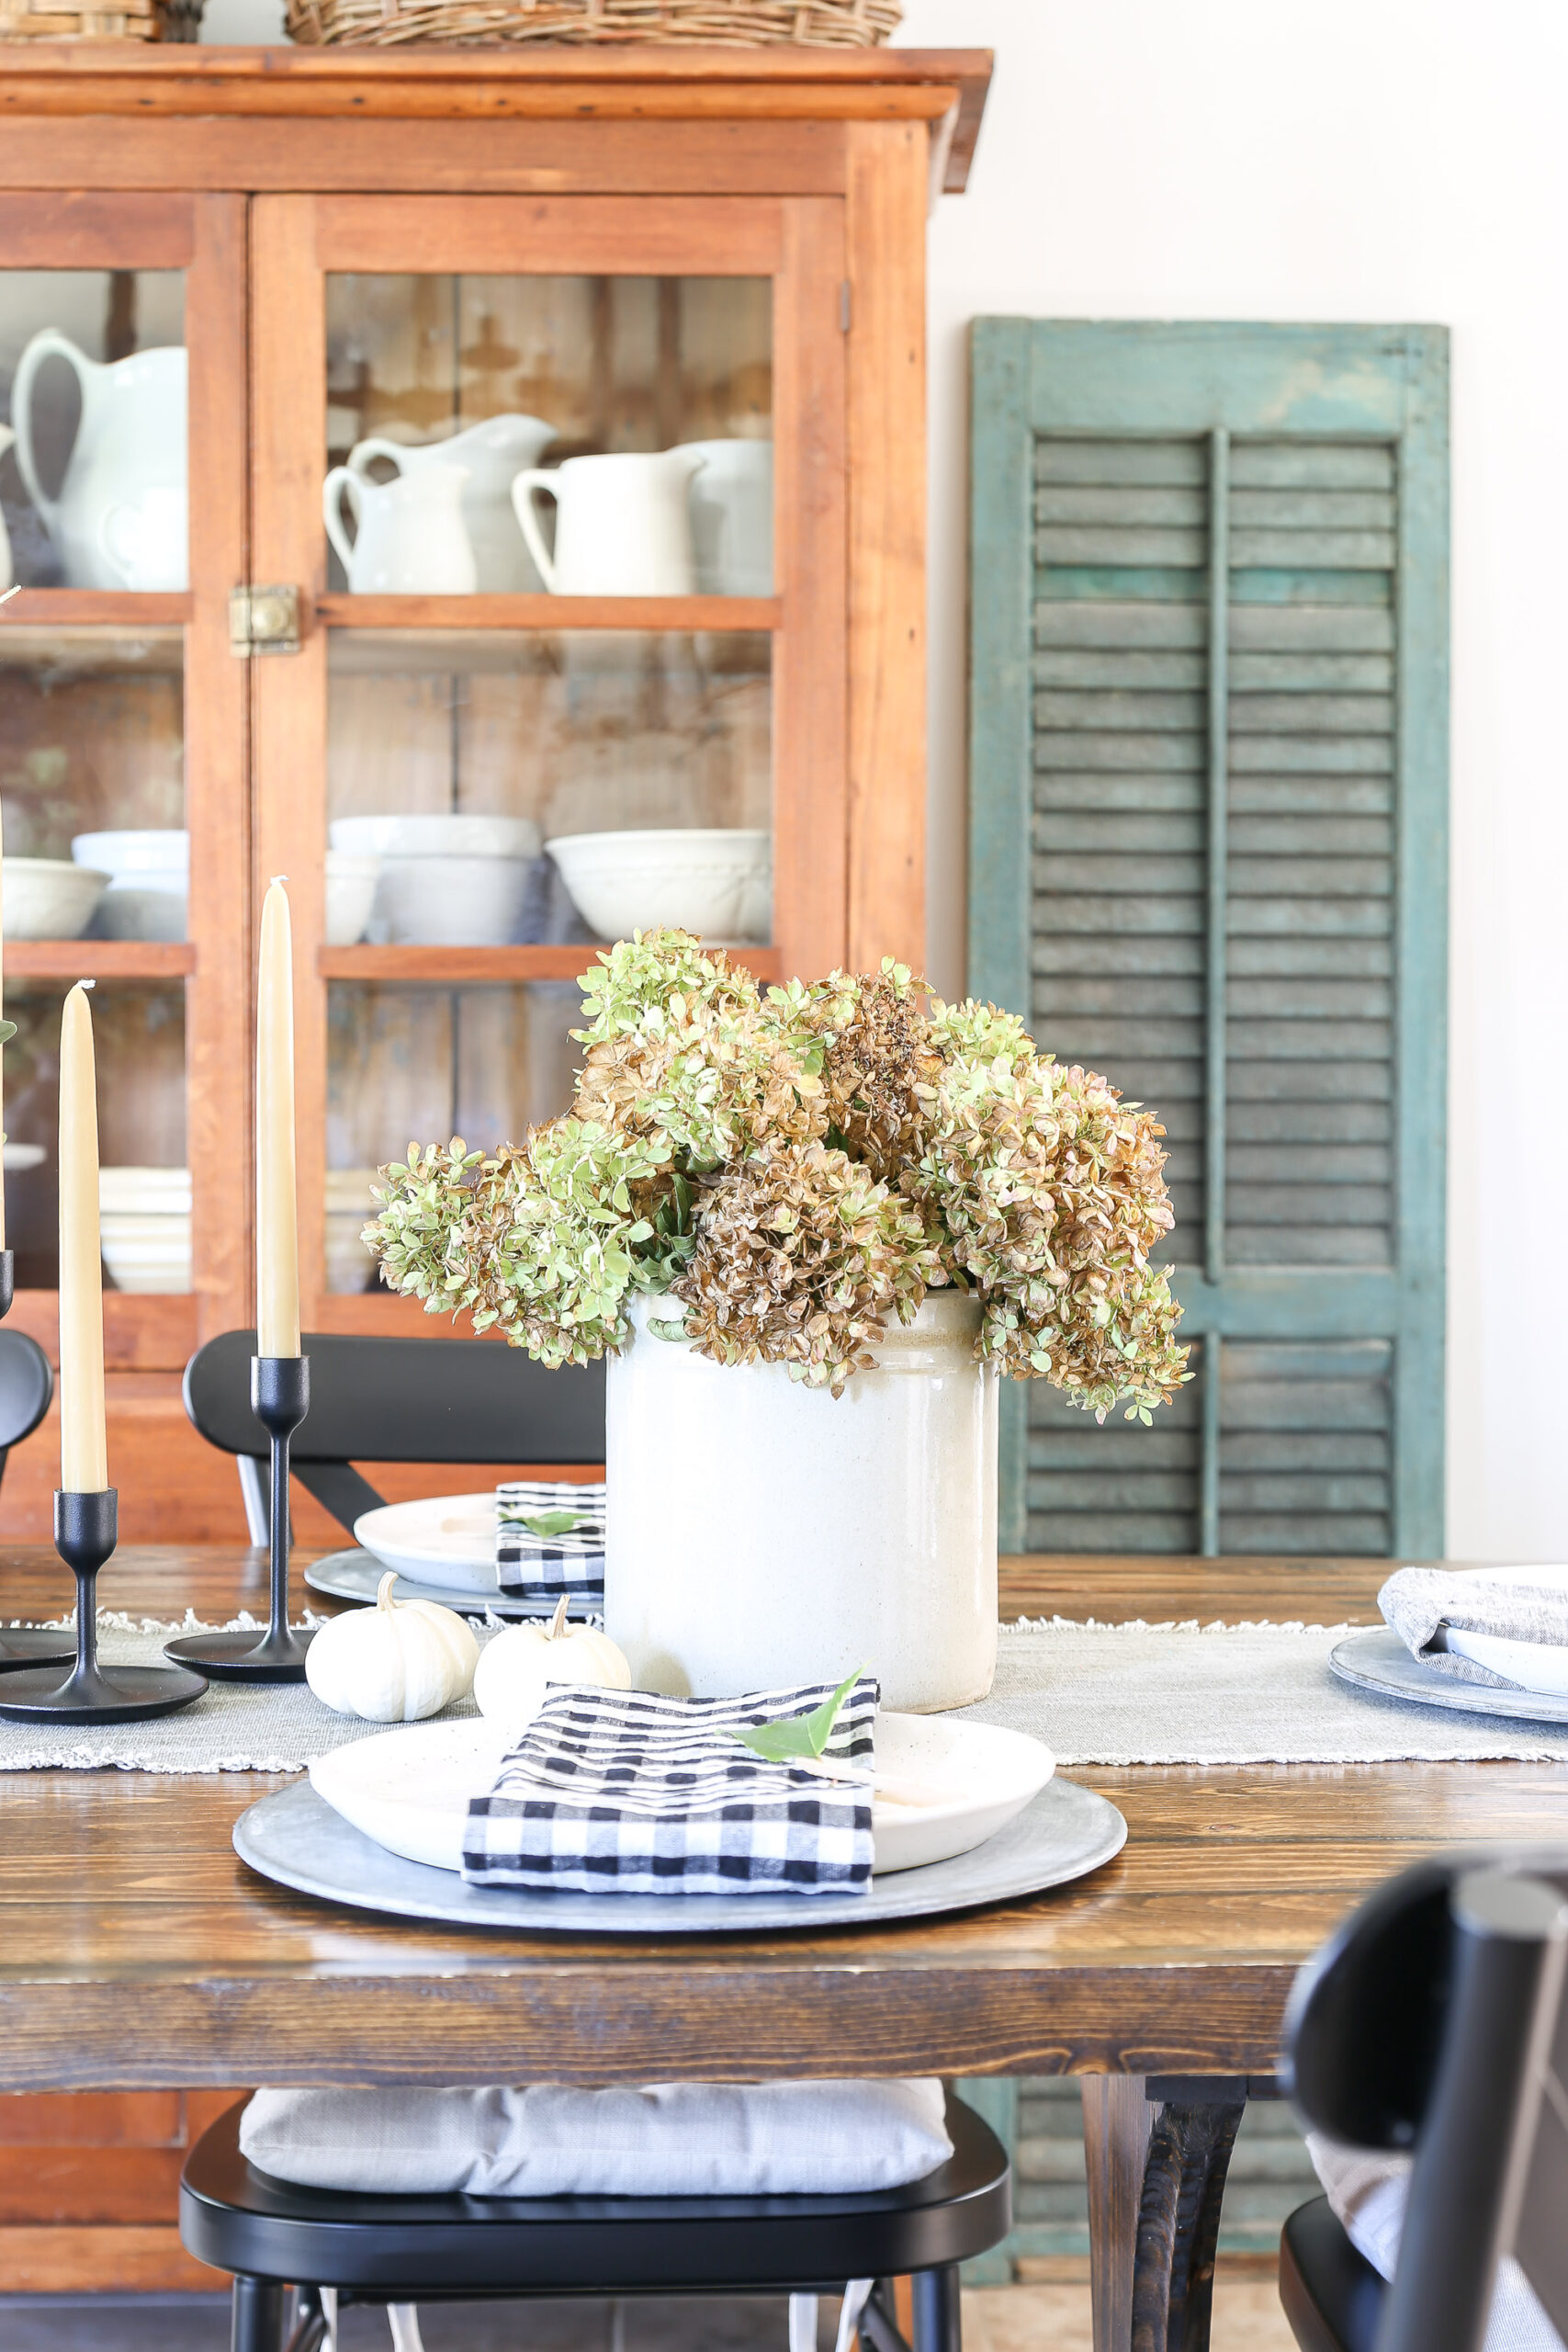 How to decorate the dining room for fall 